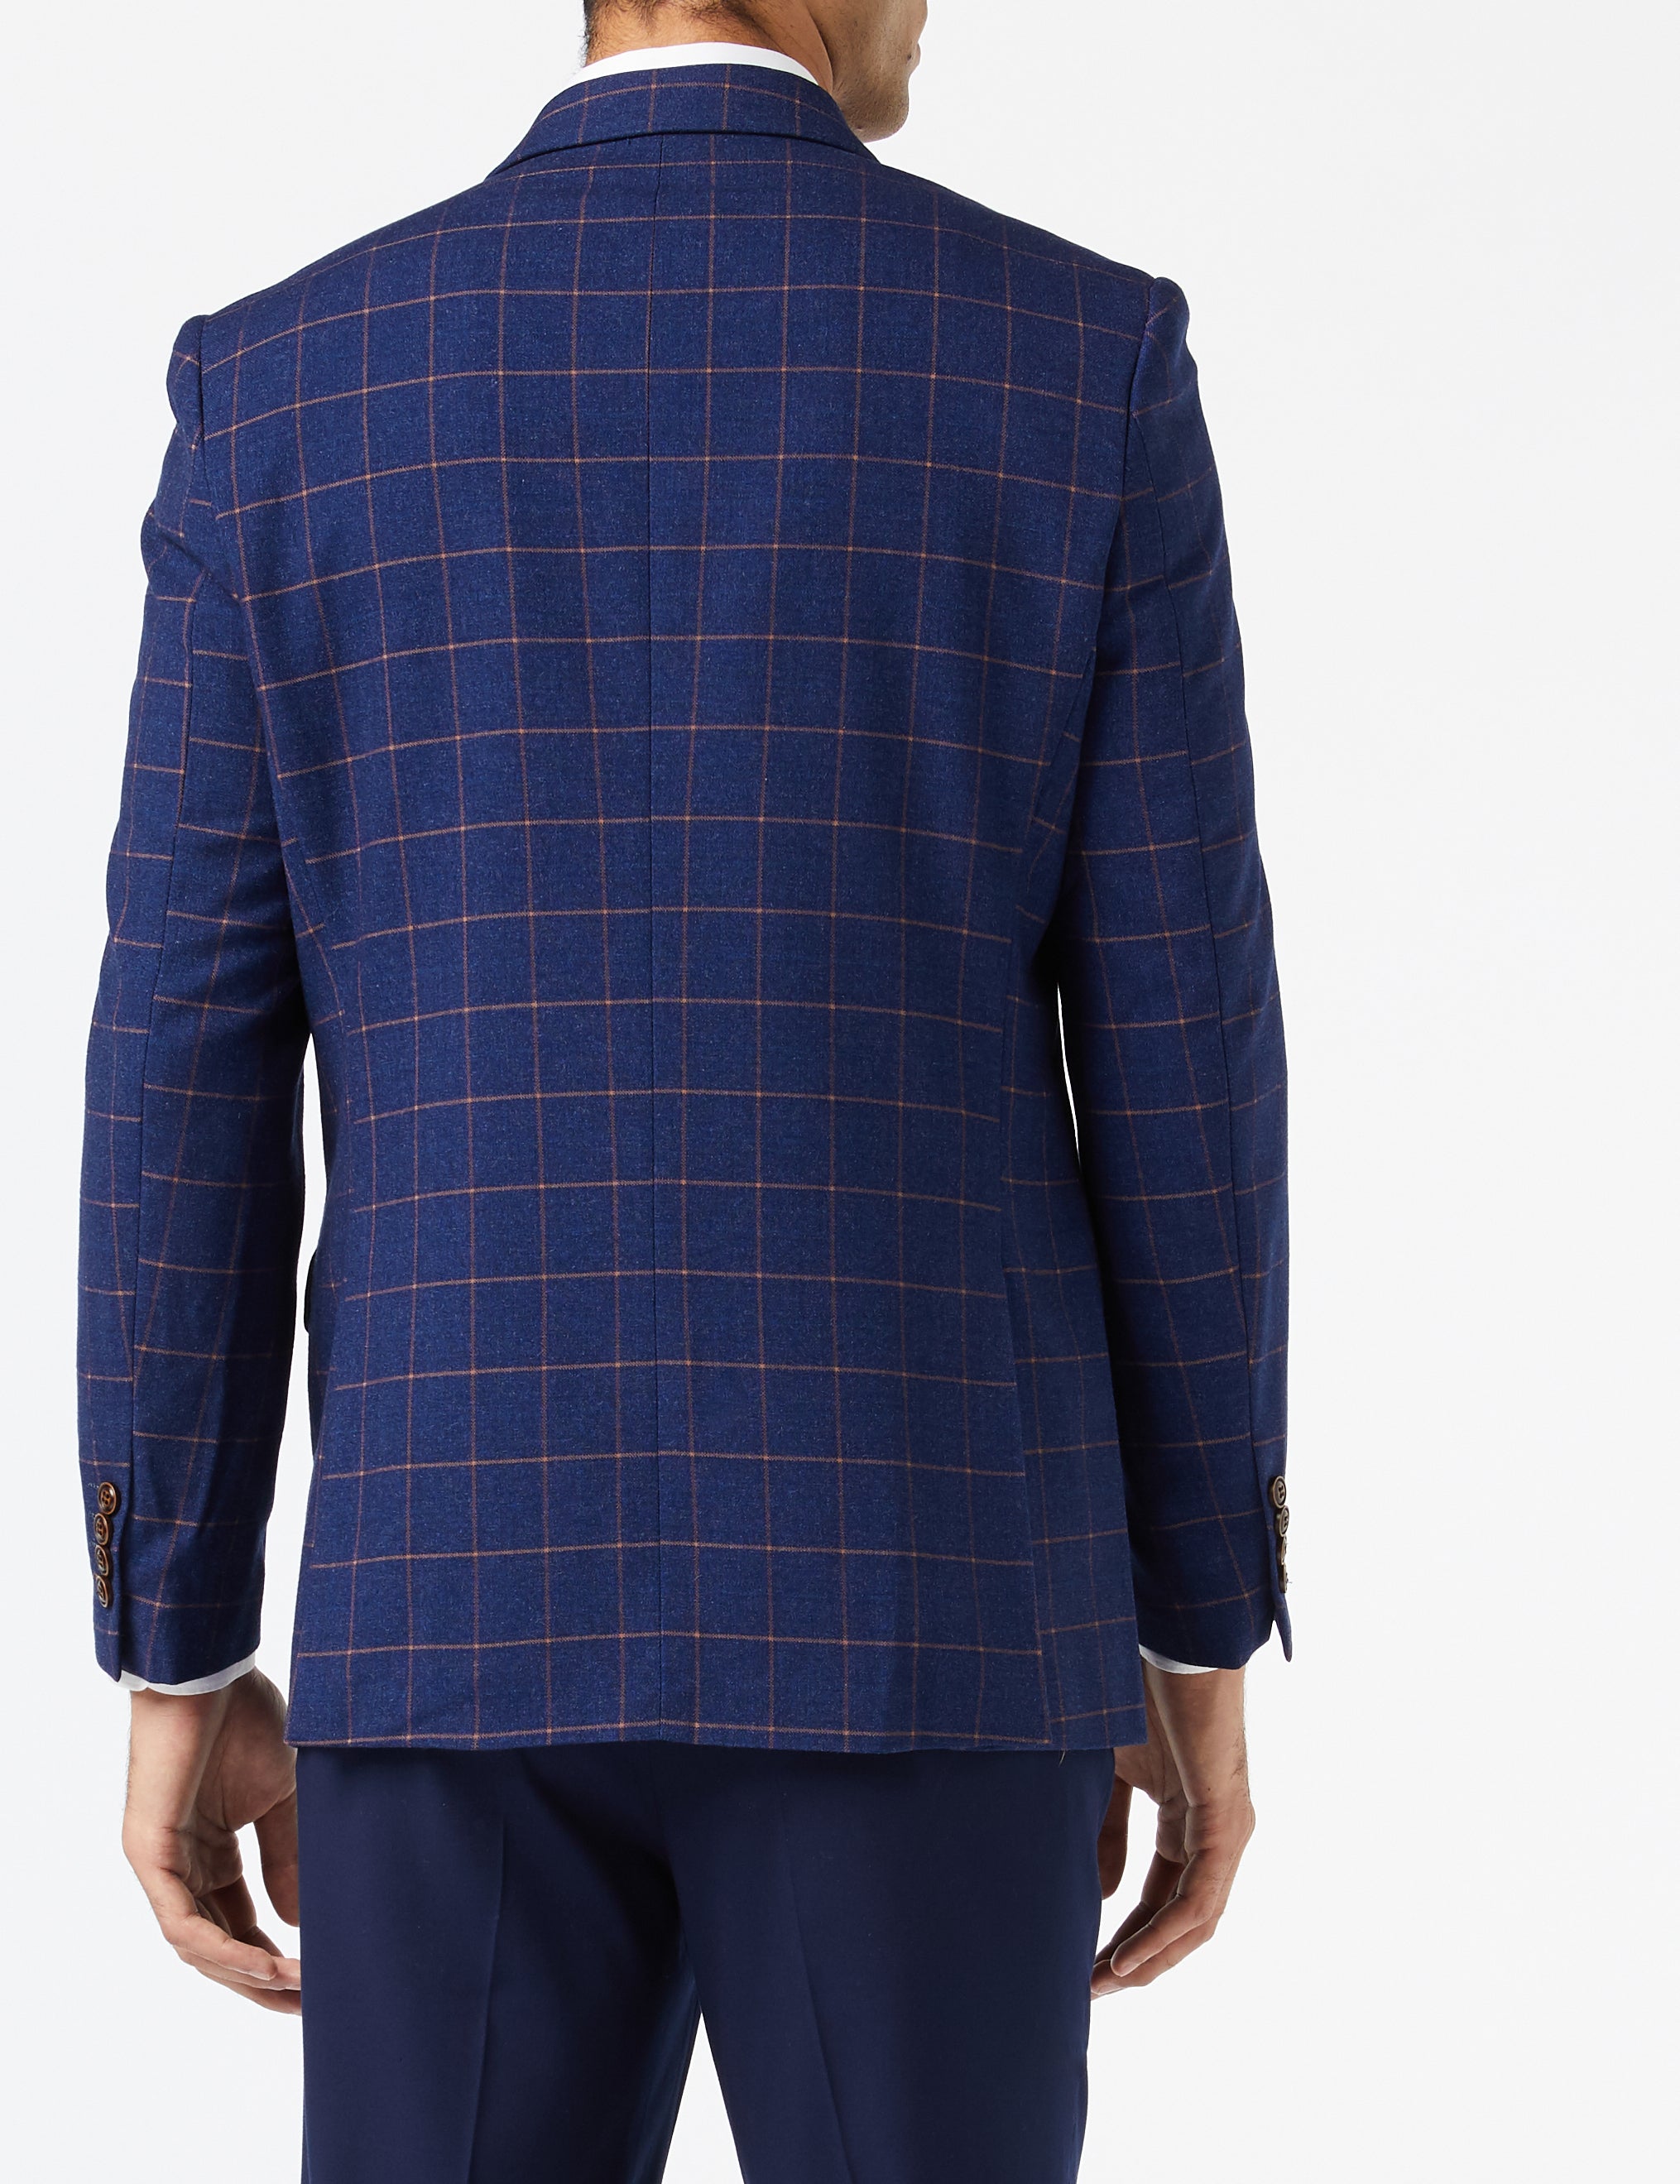 Mens Double Breasted Blazer Orange On Blue Window Check Tailored Fit Suit Jacket